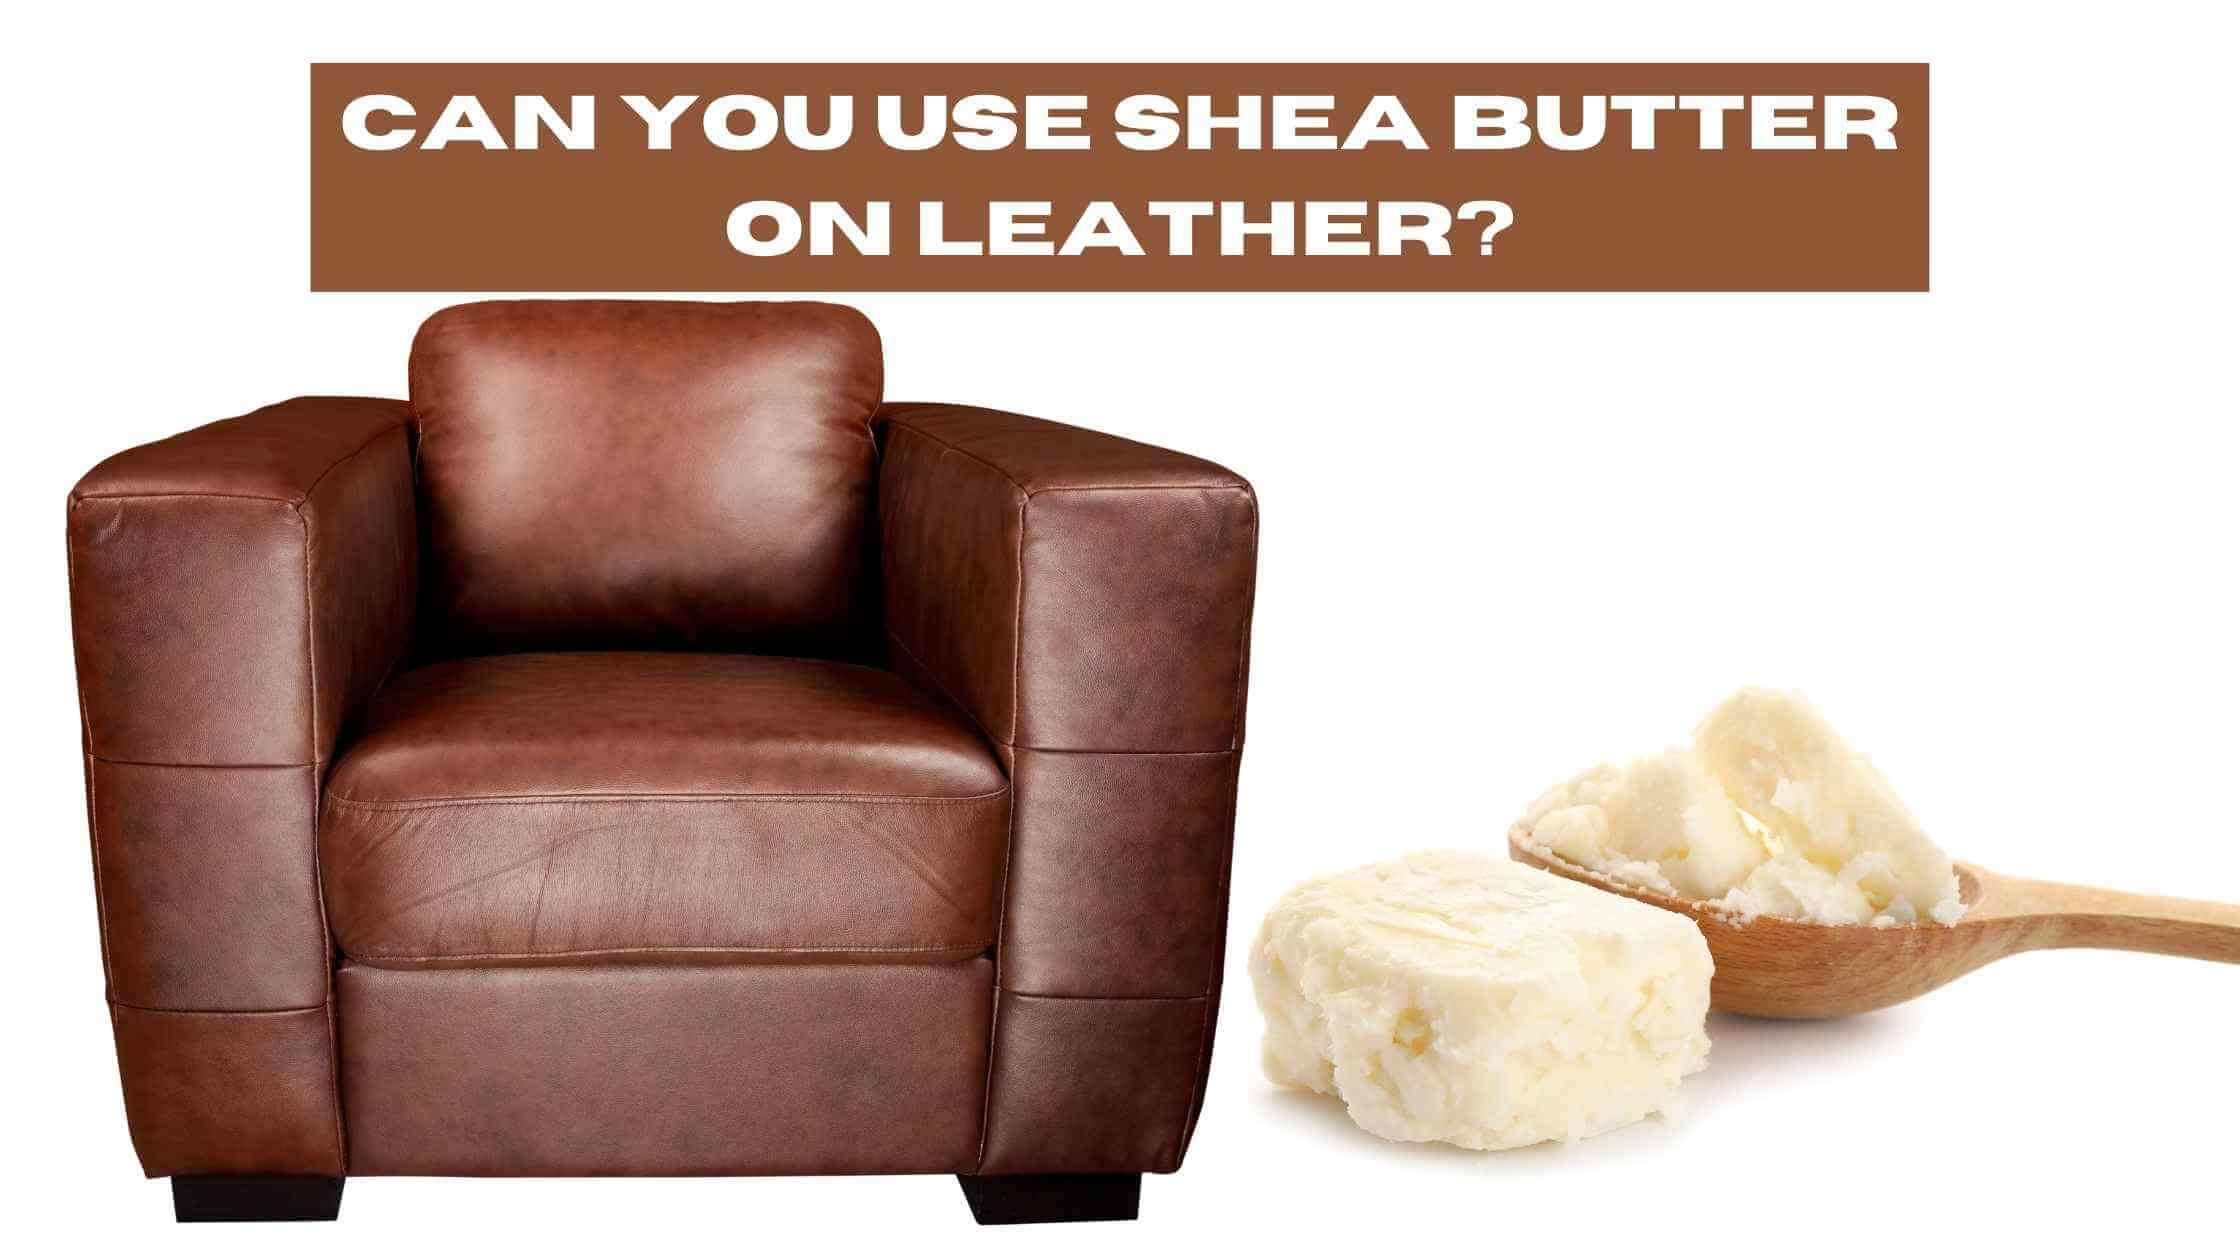 Can You Use Shea Butter on Leather